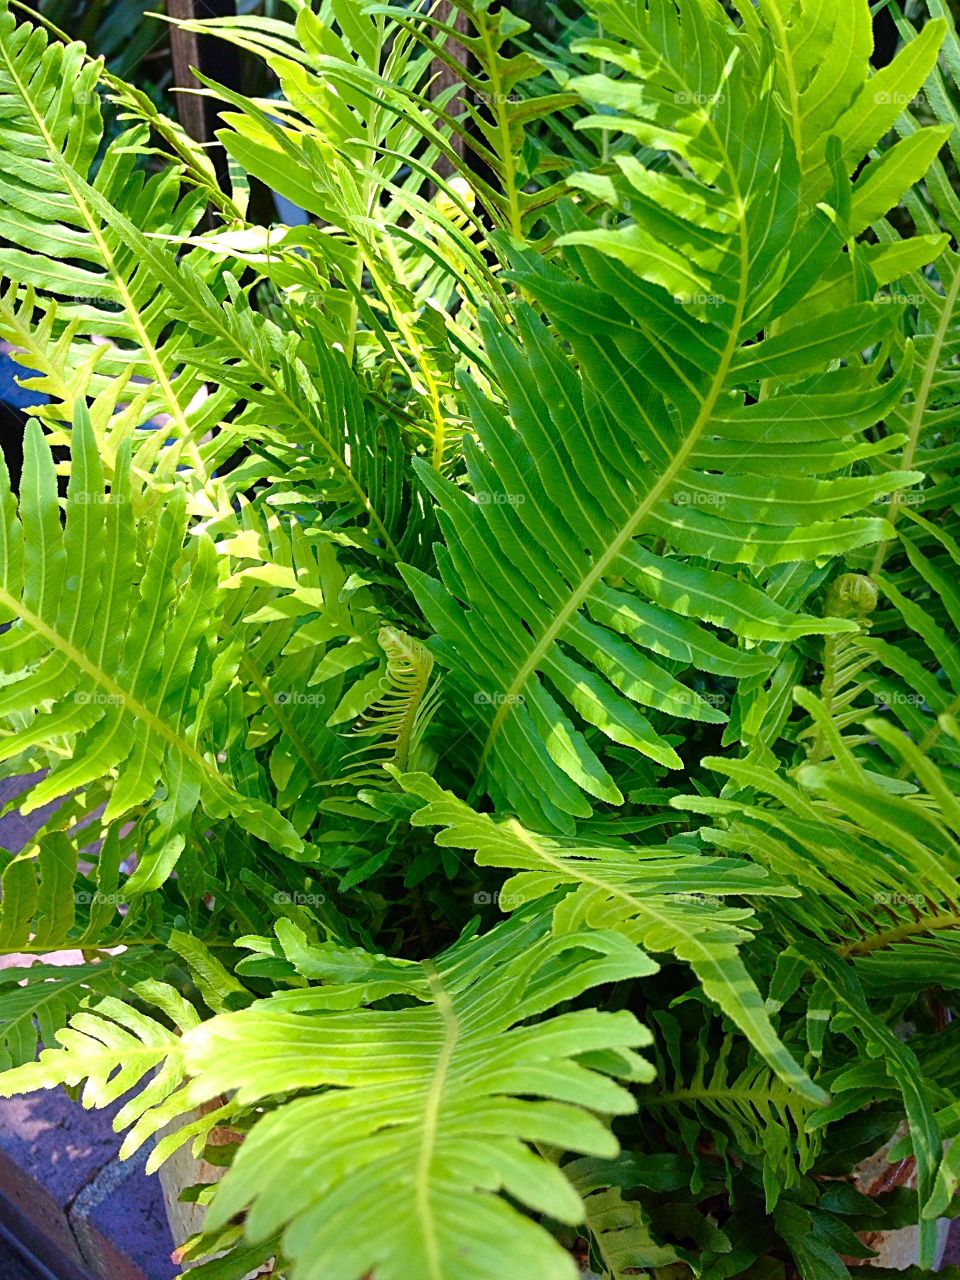 Green silver lady blechnum fern with new fronds